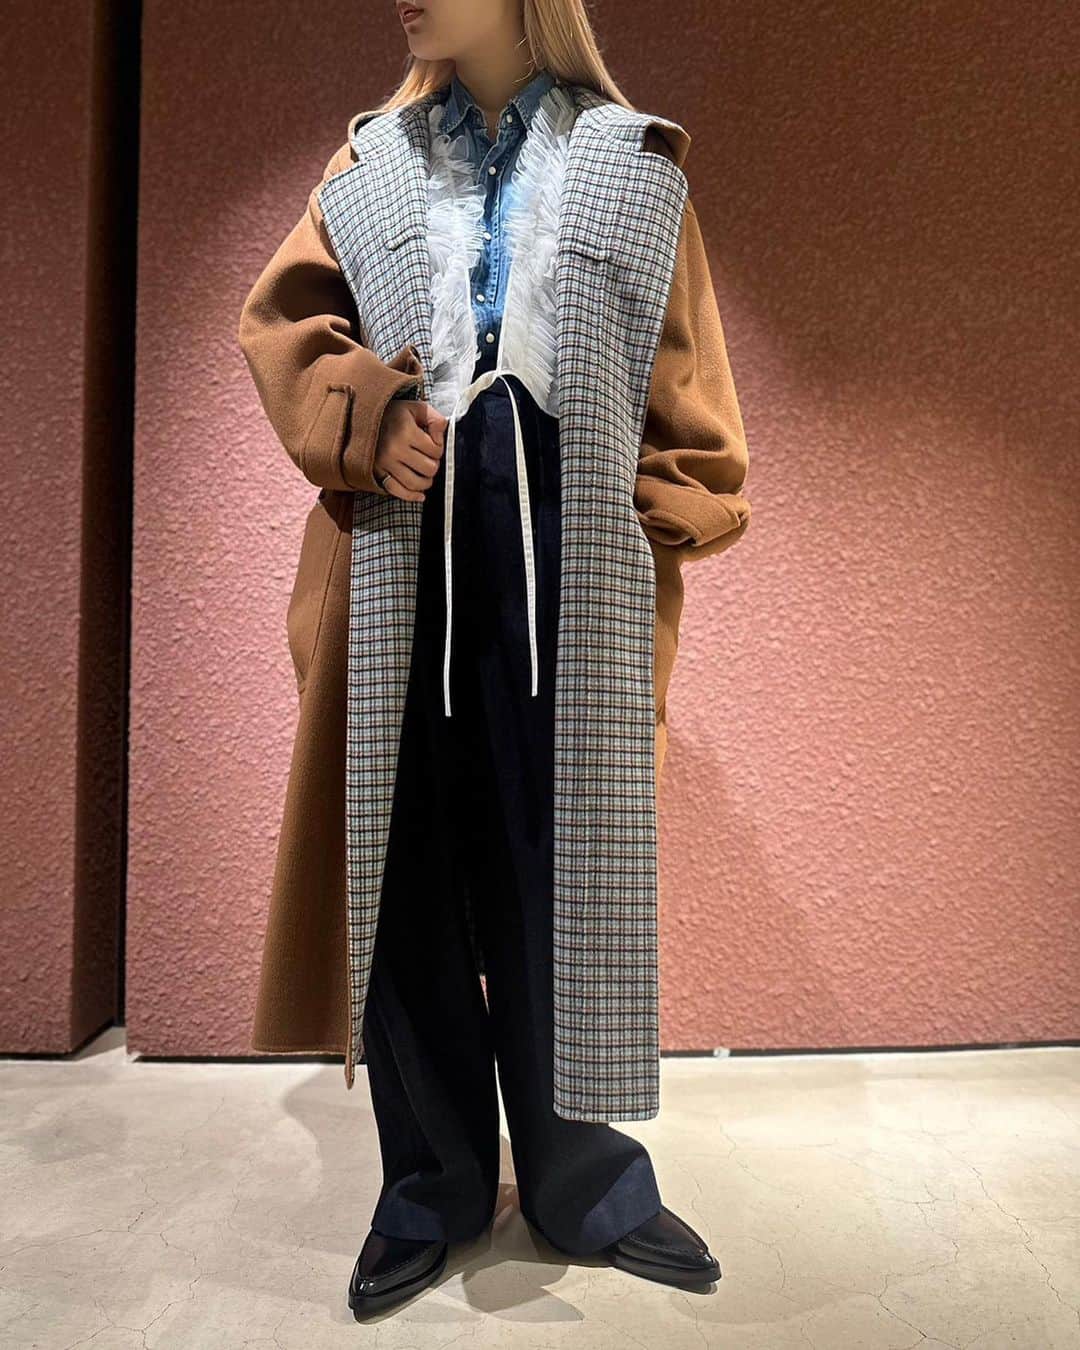 6(ROKU) OFFICIALのインスタグラム：「-  6 reber duffle coat ¥89,100- tax in  @marge_tokyo for 6 gilet ¥49,500- tax in  6 denim pants ¥25,300- tax in  JILSANDER shoes ¥162,800- tax in  #roku #marge #marge_tokyo #jilsander」